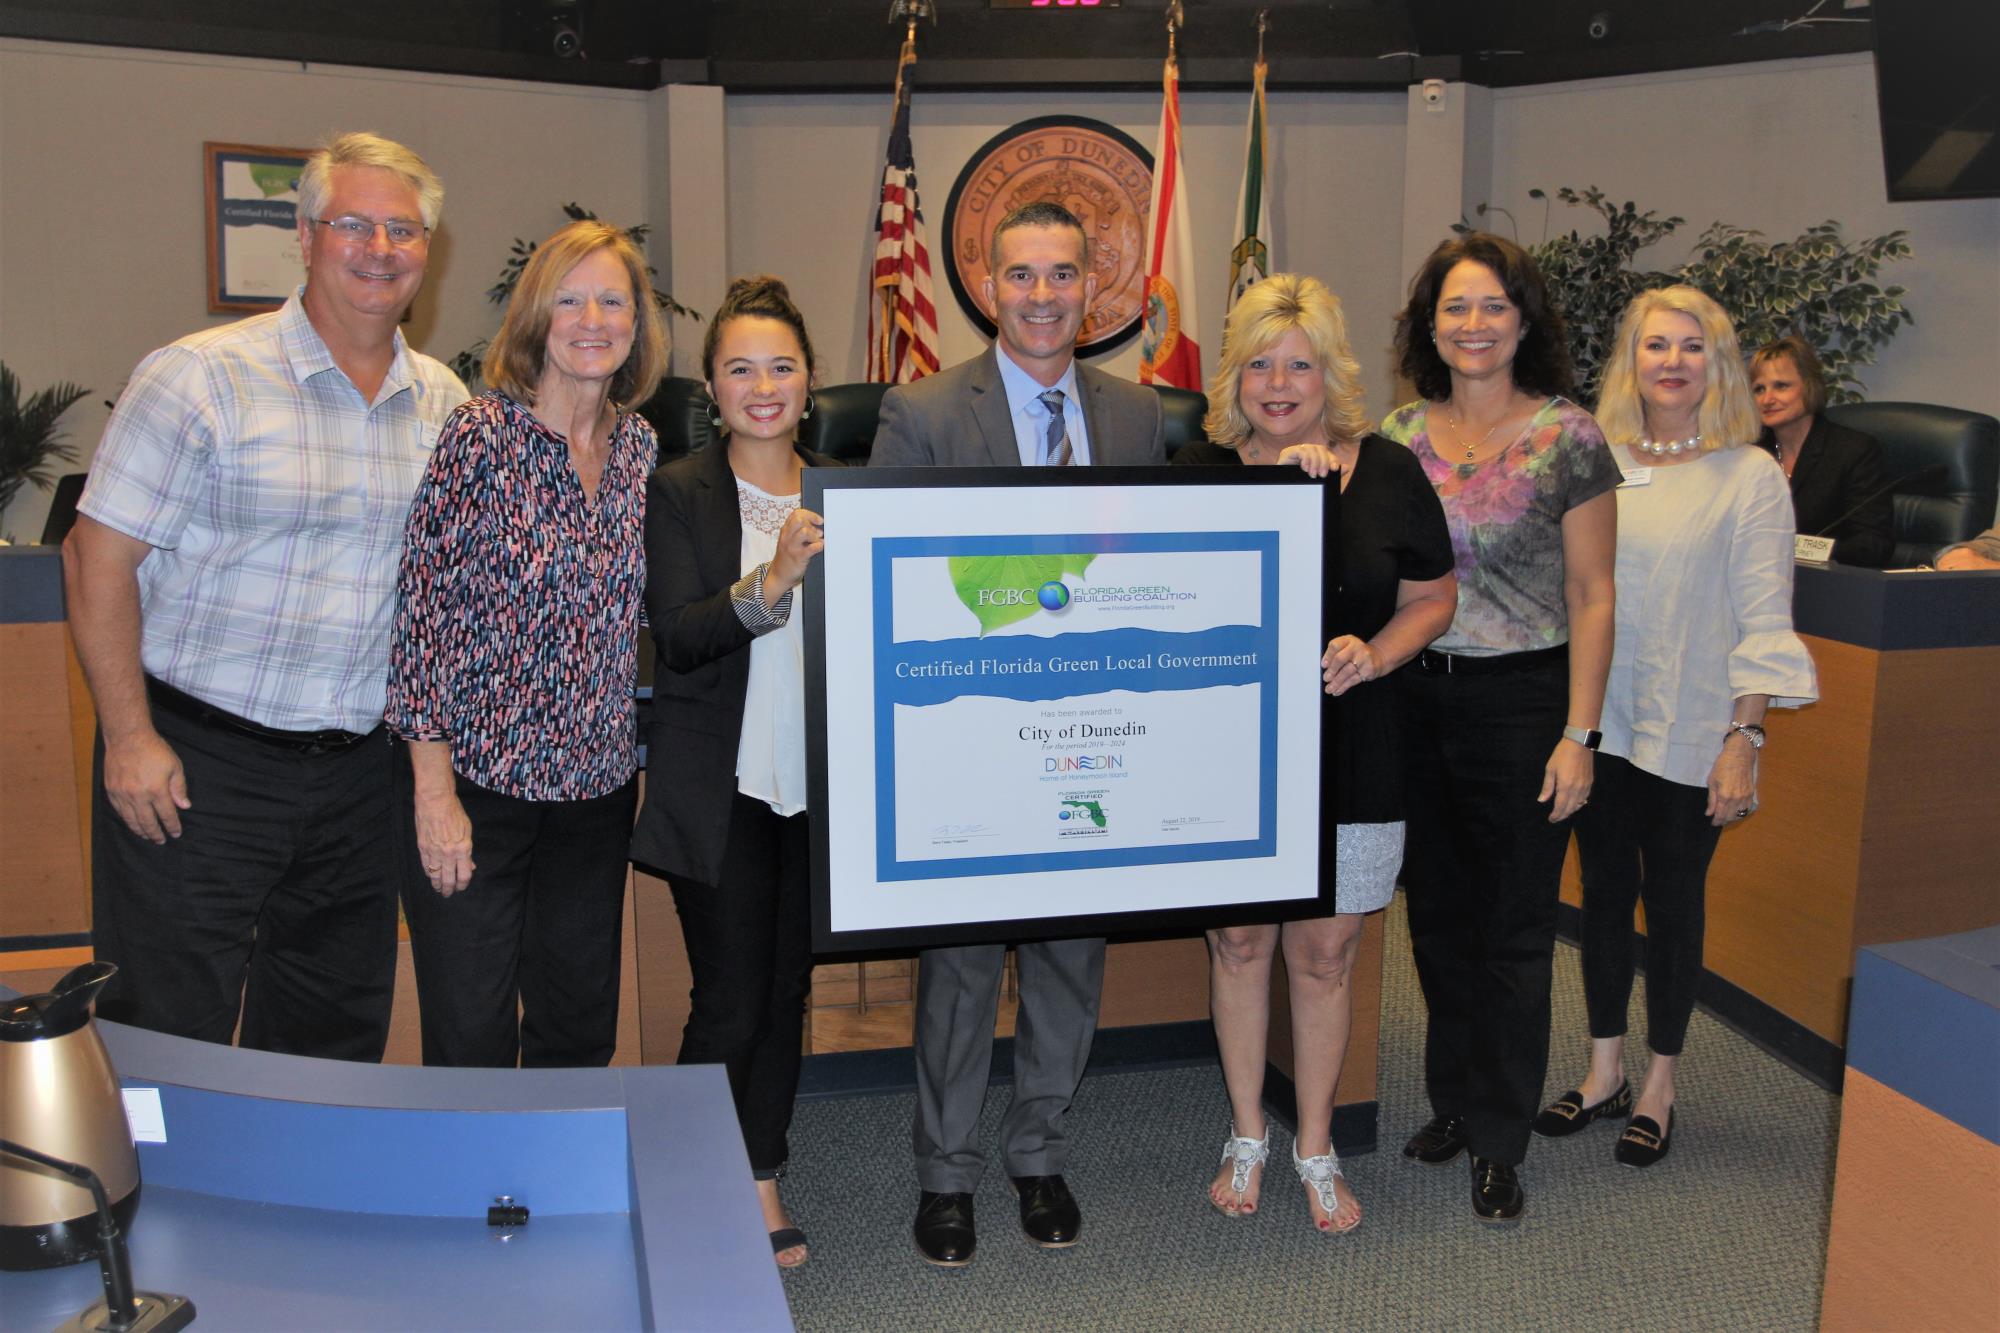 Winners of the Platinum Level Green Local Government Certification